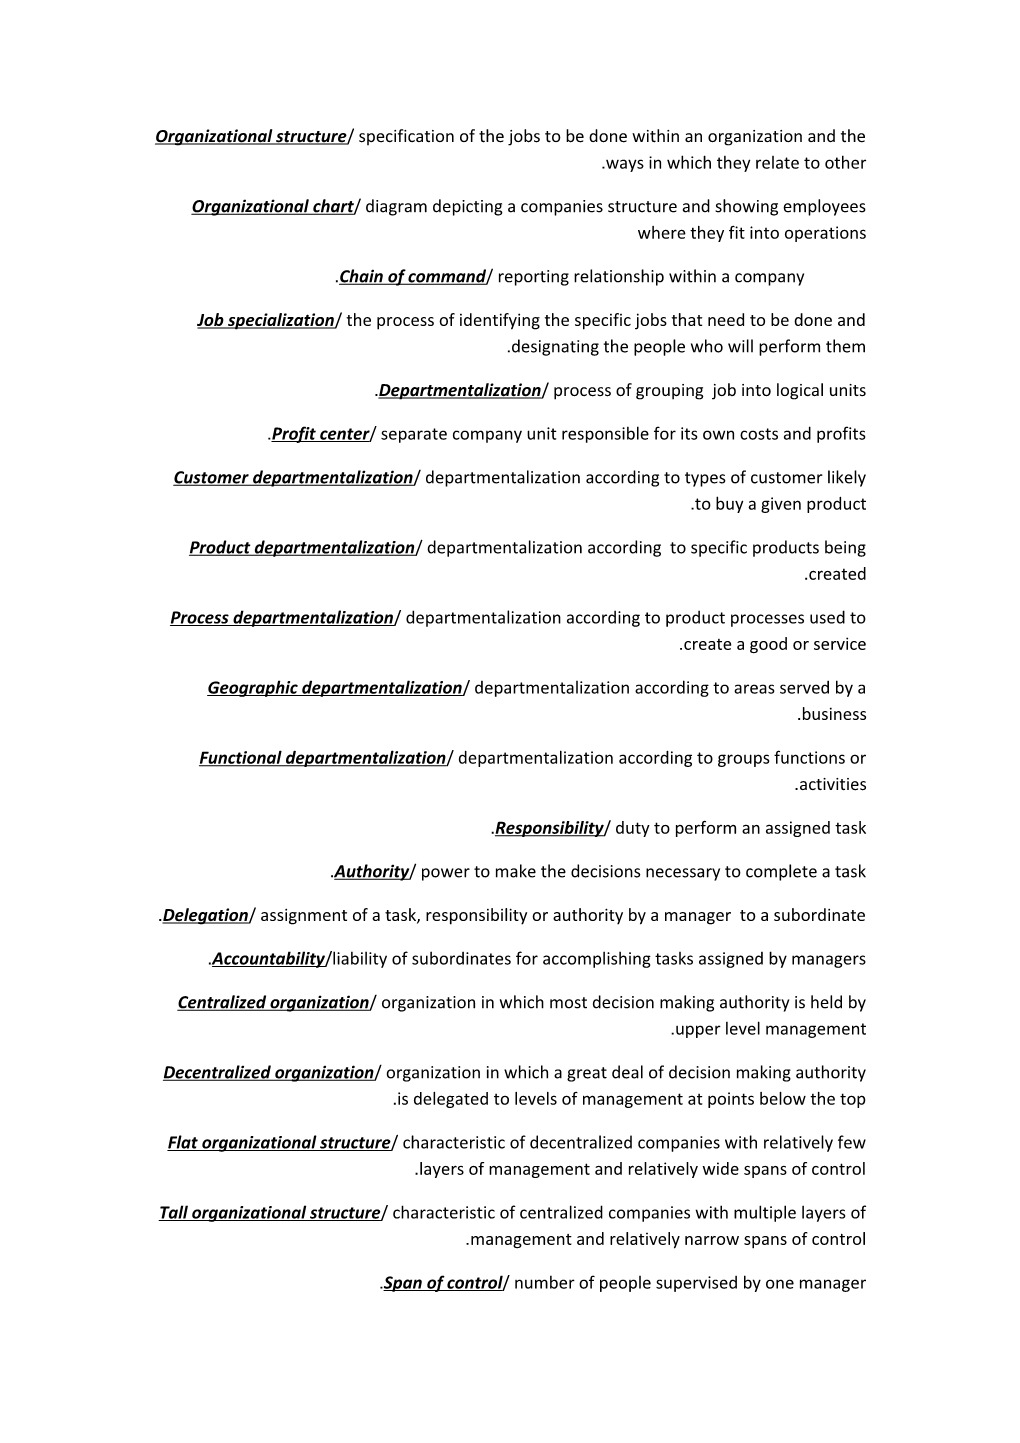 Organizational Structure/ Specification of the Jobs to Be Done Within an Organization And